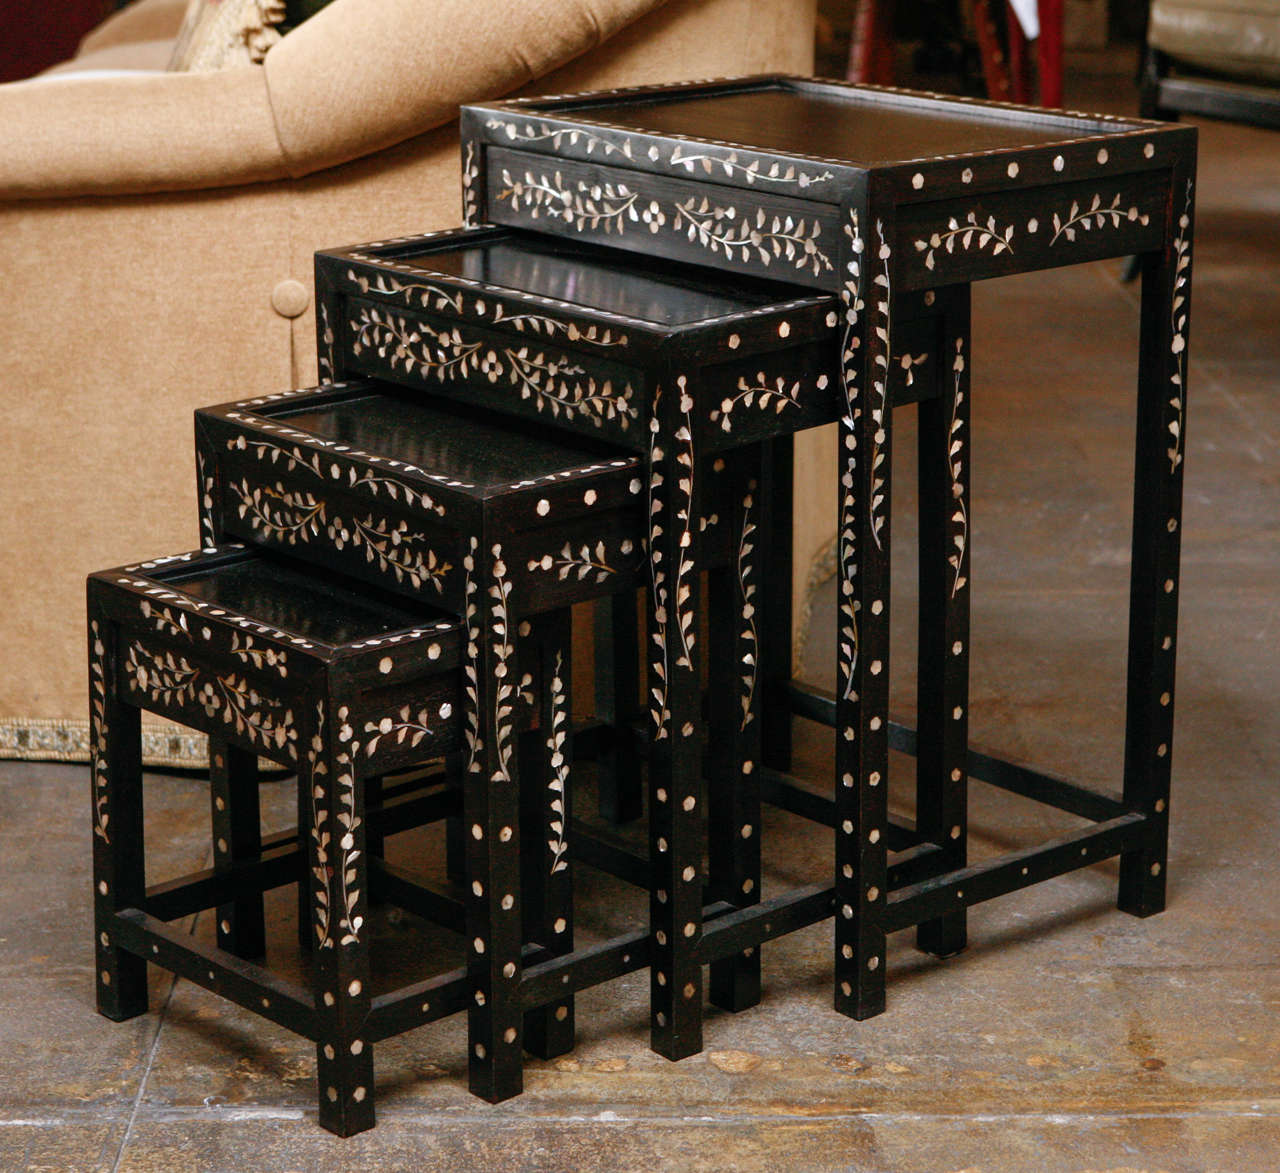 Set of 3 Ebony Nesting Tables with Mother of Pear Inlay